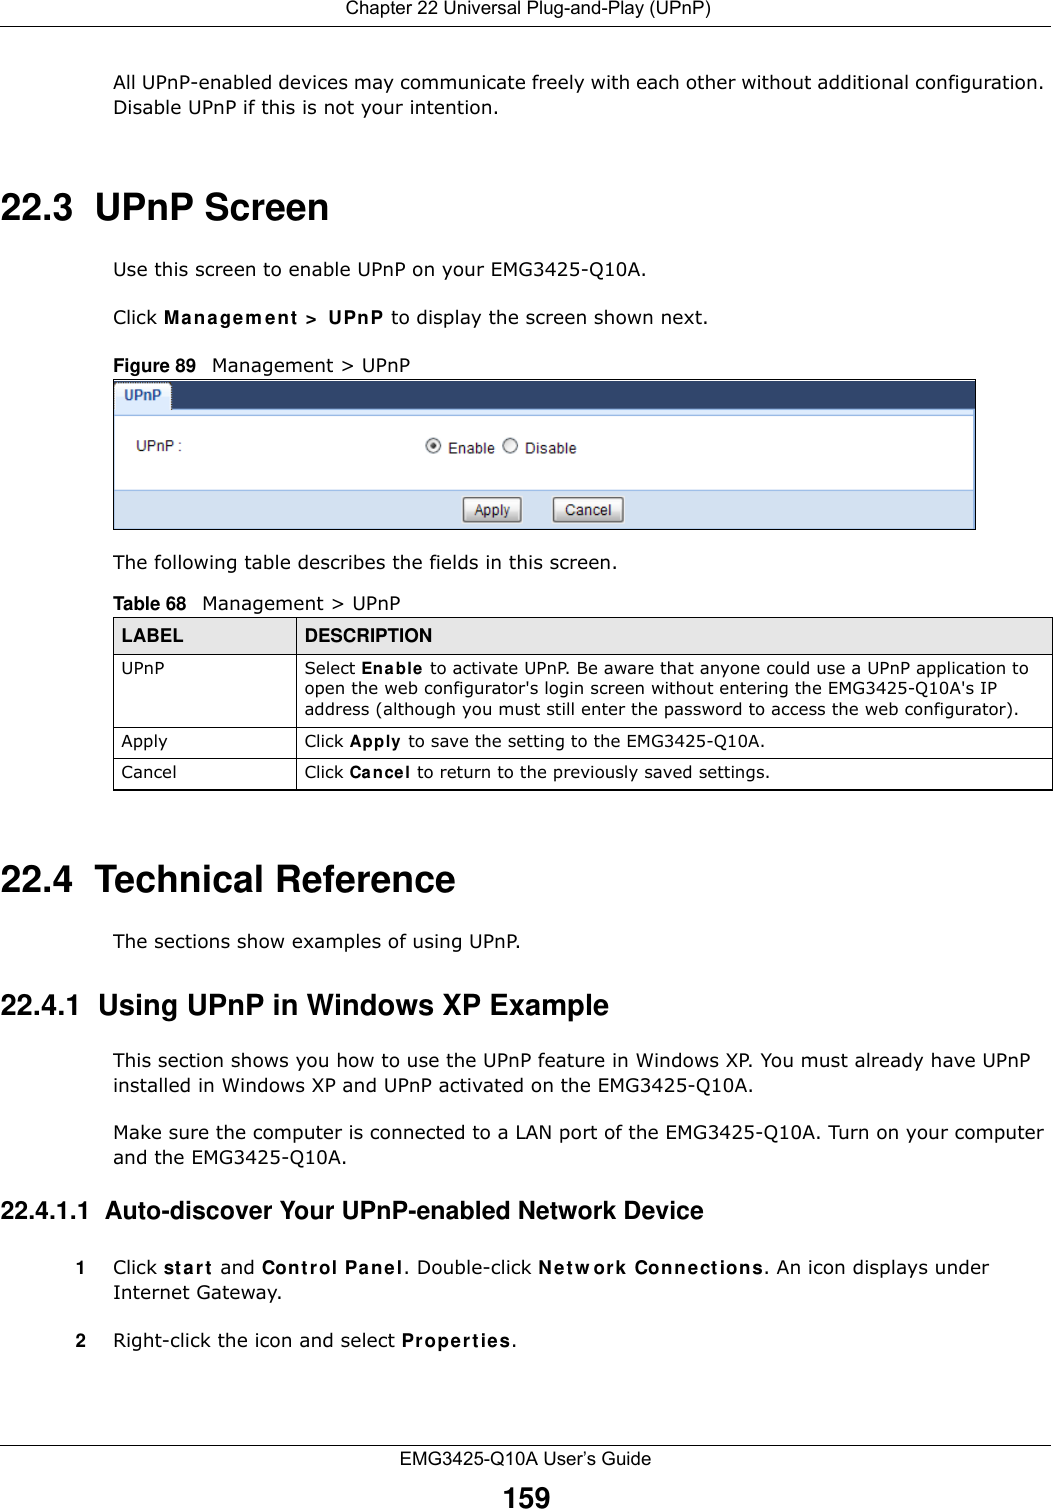  Chapter 22 Universal Plug-and-Play (UPnP)EMG3425-Q10A User’s Guide159All UPnP-enabled devices may communicate freely with each other without additional configuration. Disable UPnP if this is not your intention. 22.3  UPnP Screen Use this screen to enable UPnP on your EMG3425-Q10A.Click M a nagem e nt  &gt;  UPn P to display the screen shown next. Figure 89   Management &gt; UPnPThe following table describes the fields in this screen.22.4  Technical ReferenceThe sections show examples of using UPnP. 22.4.1  Using UPnP in Windows XP ExampleThis section shows you how to use the UPnP feature in Windows XP. You must already have UPnP installed in Windows XP and UPnP activated on the EMG3425-Q10A.Make sure the computer is connected to a LAN port of the EMG3425-Q10A. Turn on your computer and the EMG3425-Q10A. 22.4.1.1  Auto-discover Your UPnP-enabled Network Device1Click st a r t  and Cont r ol Pane l. Double-click Net w or k Connections. An icon displays under Internet Gateway.2Right-click the icon and select Pr ope rt ie s. Table 68   Management &gt; UPnPLABEL DESCRIPTIONUPnP Select Enable  to activate UPnP. Be aware that anyone could use a UPnP application to open the web configurator&apos;s login screen without entering the EMG3425-Q10A&apos;s IP address (although you must still enter the password to access the web configurator).Apply Click Apply  to save the setting to the EMG3425-Q10A.Cancel Click Cancel to return to the previously saved settings.